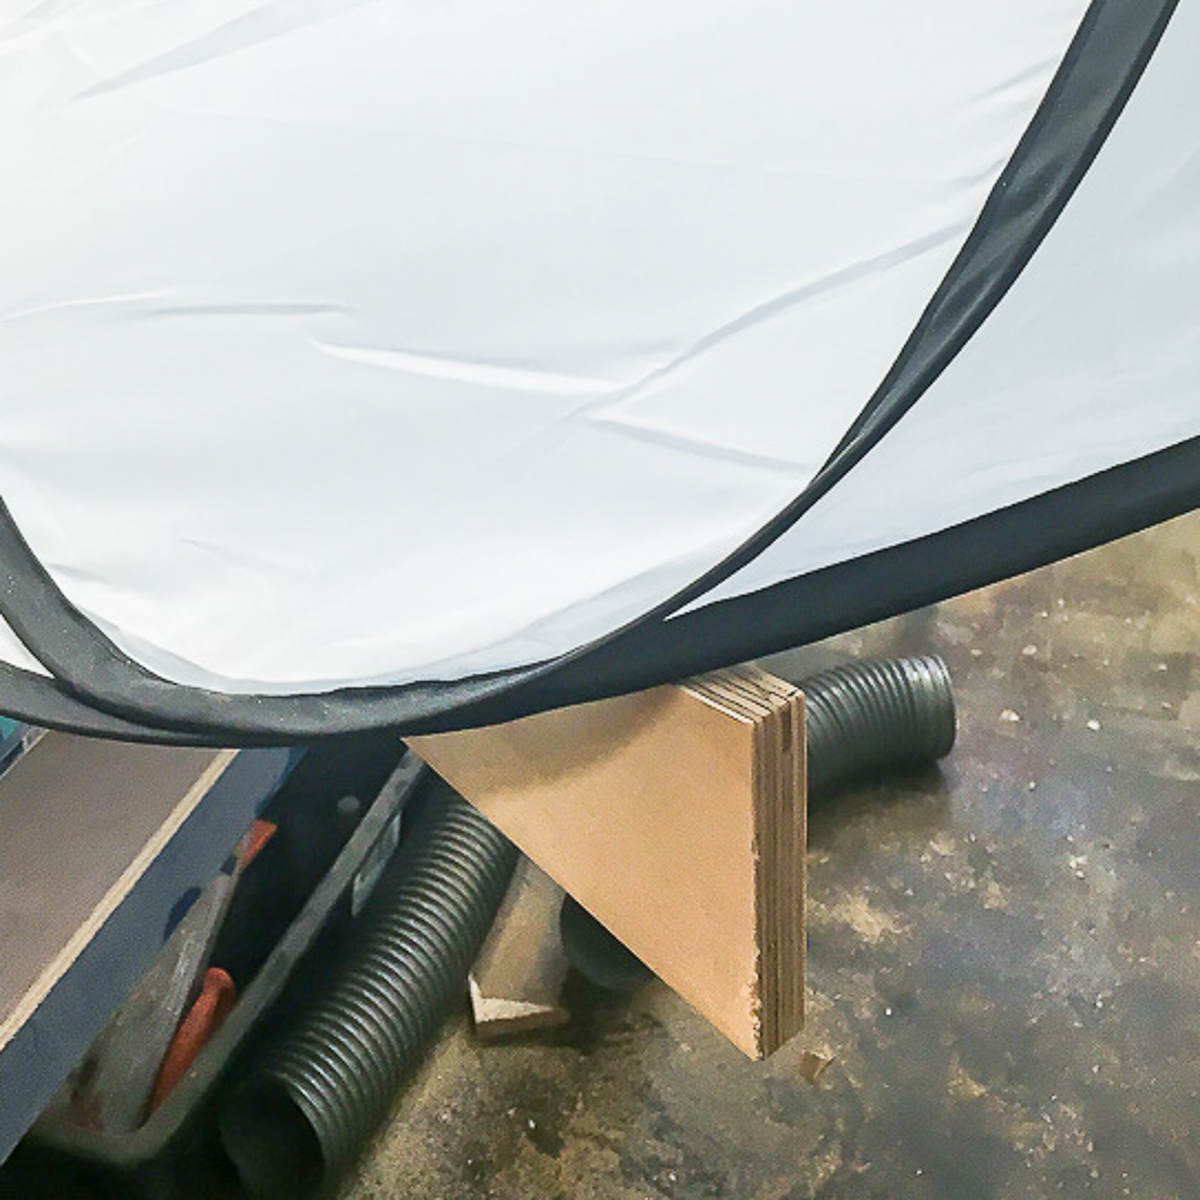 testing the tent on the angled supports